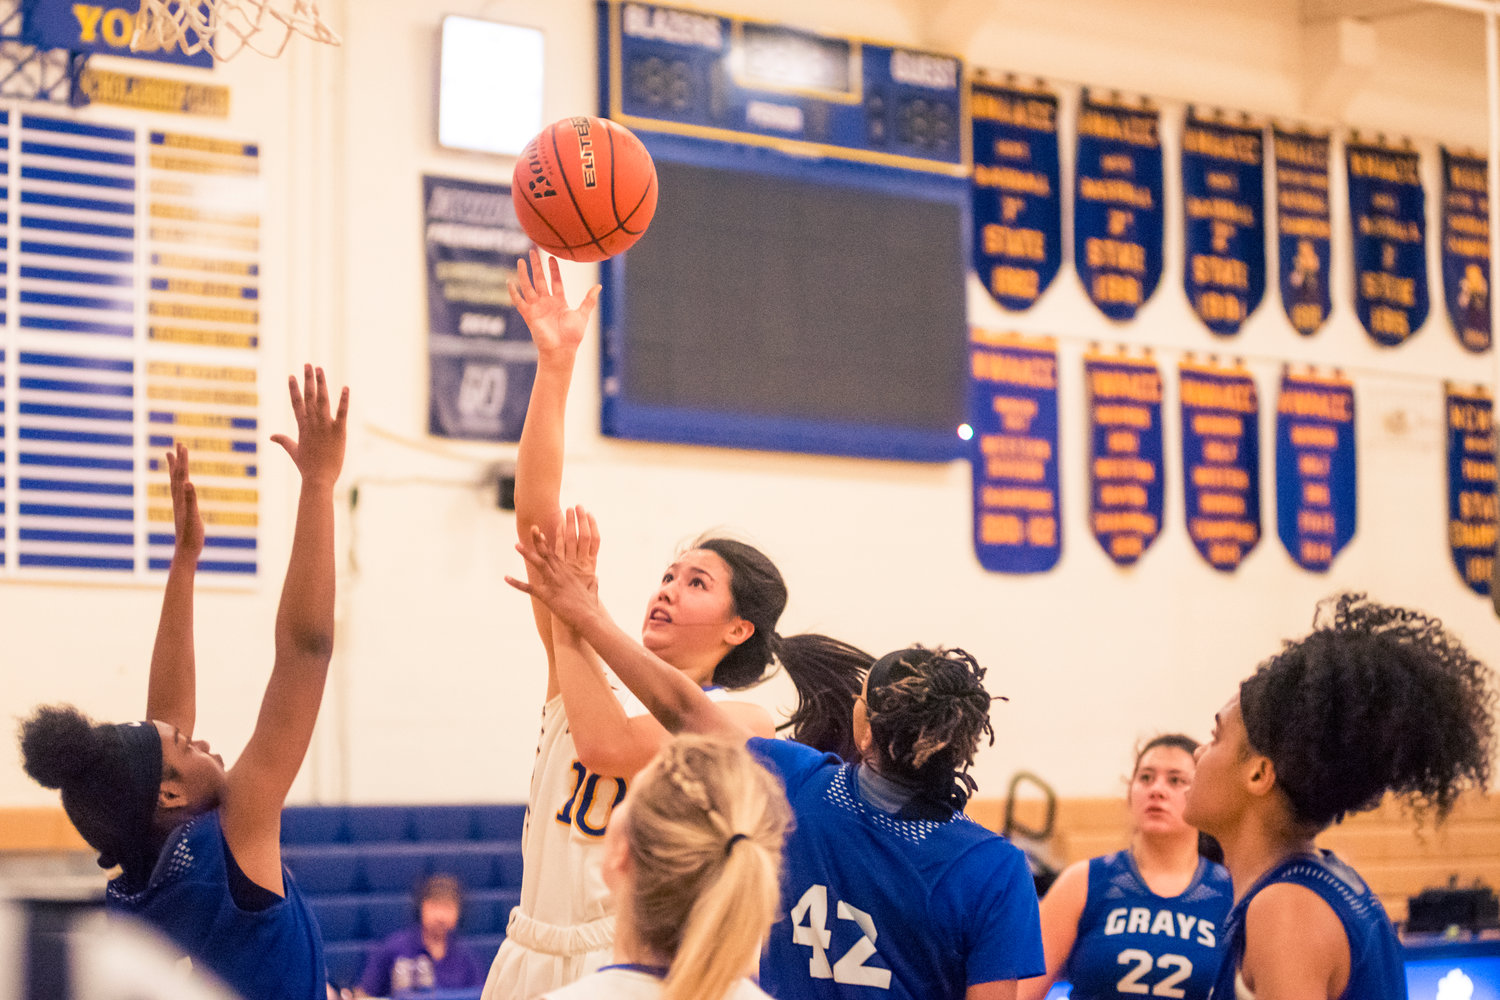 Centralia's Piper Cai (10) attempts a shot during a game against Grays Harbor Wednesday night at Centralia College.